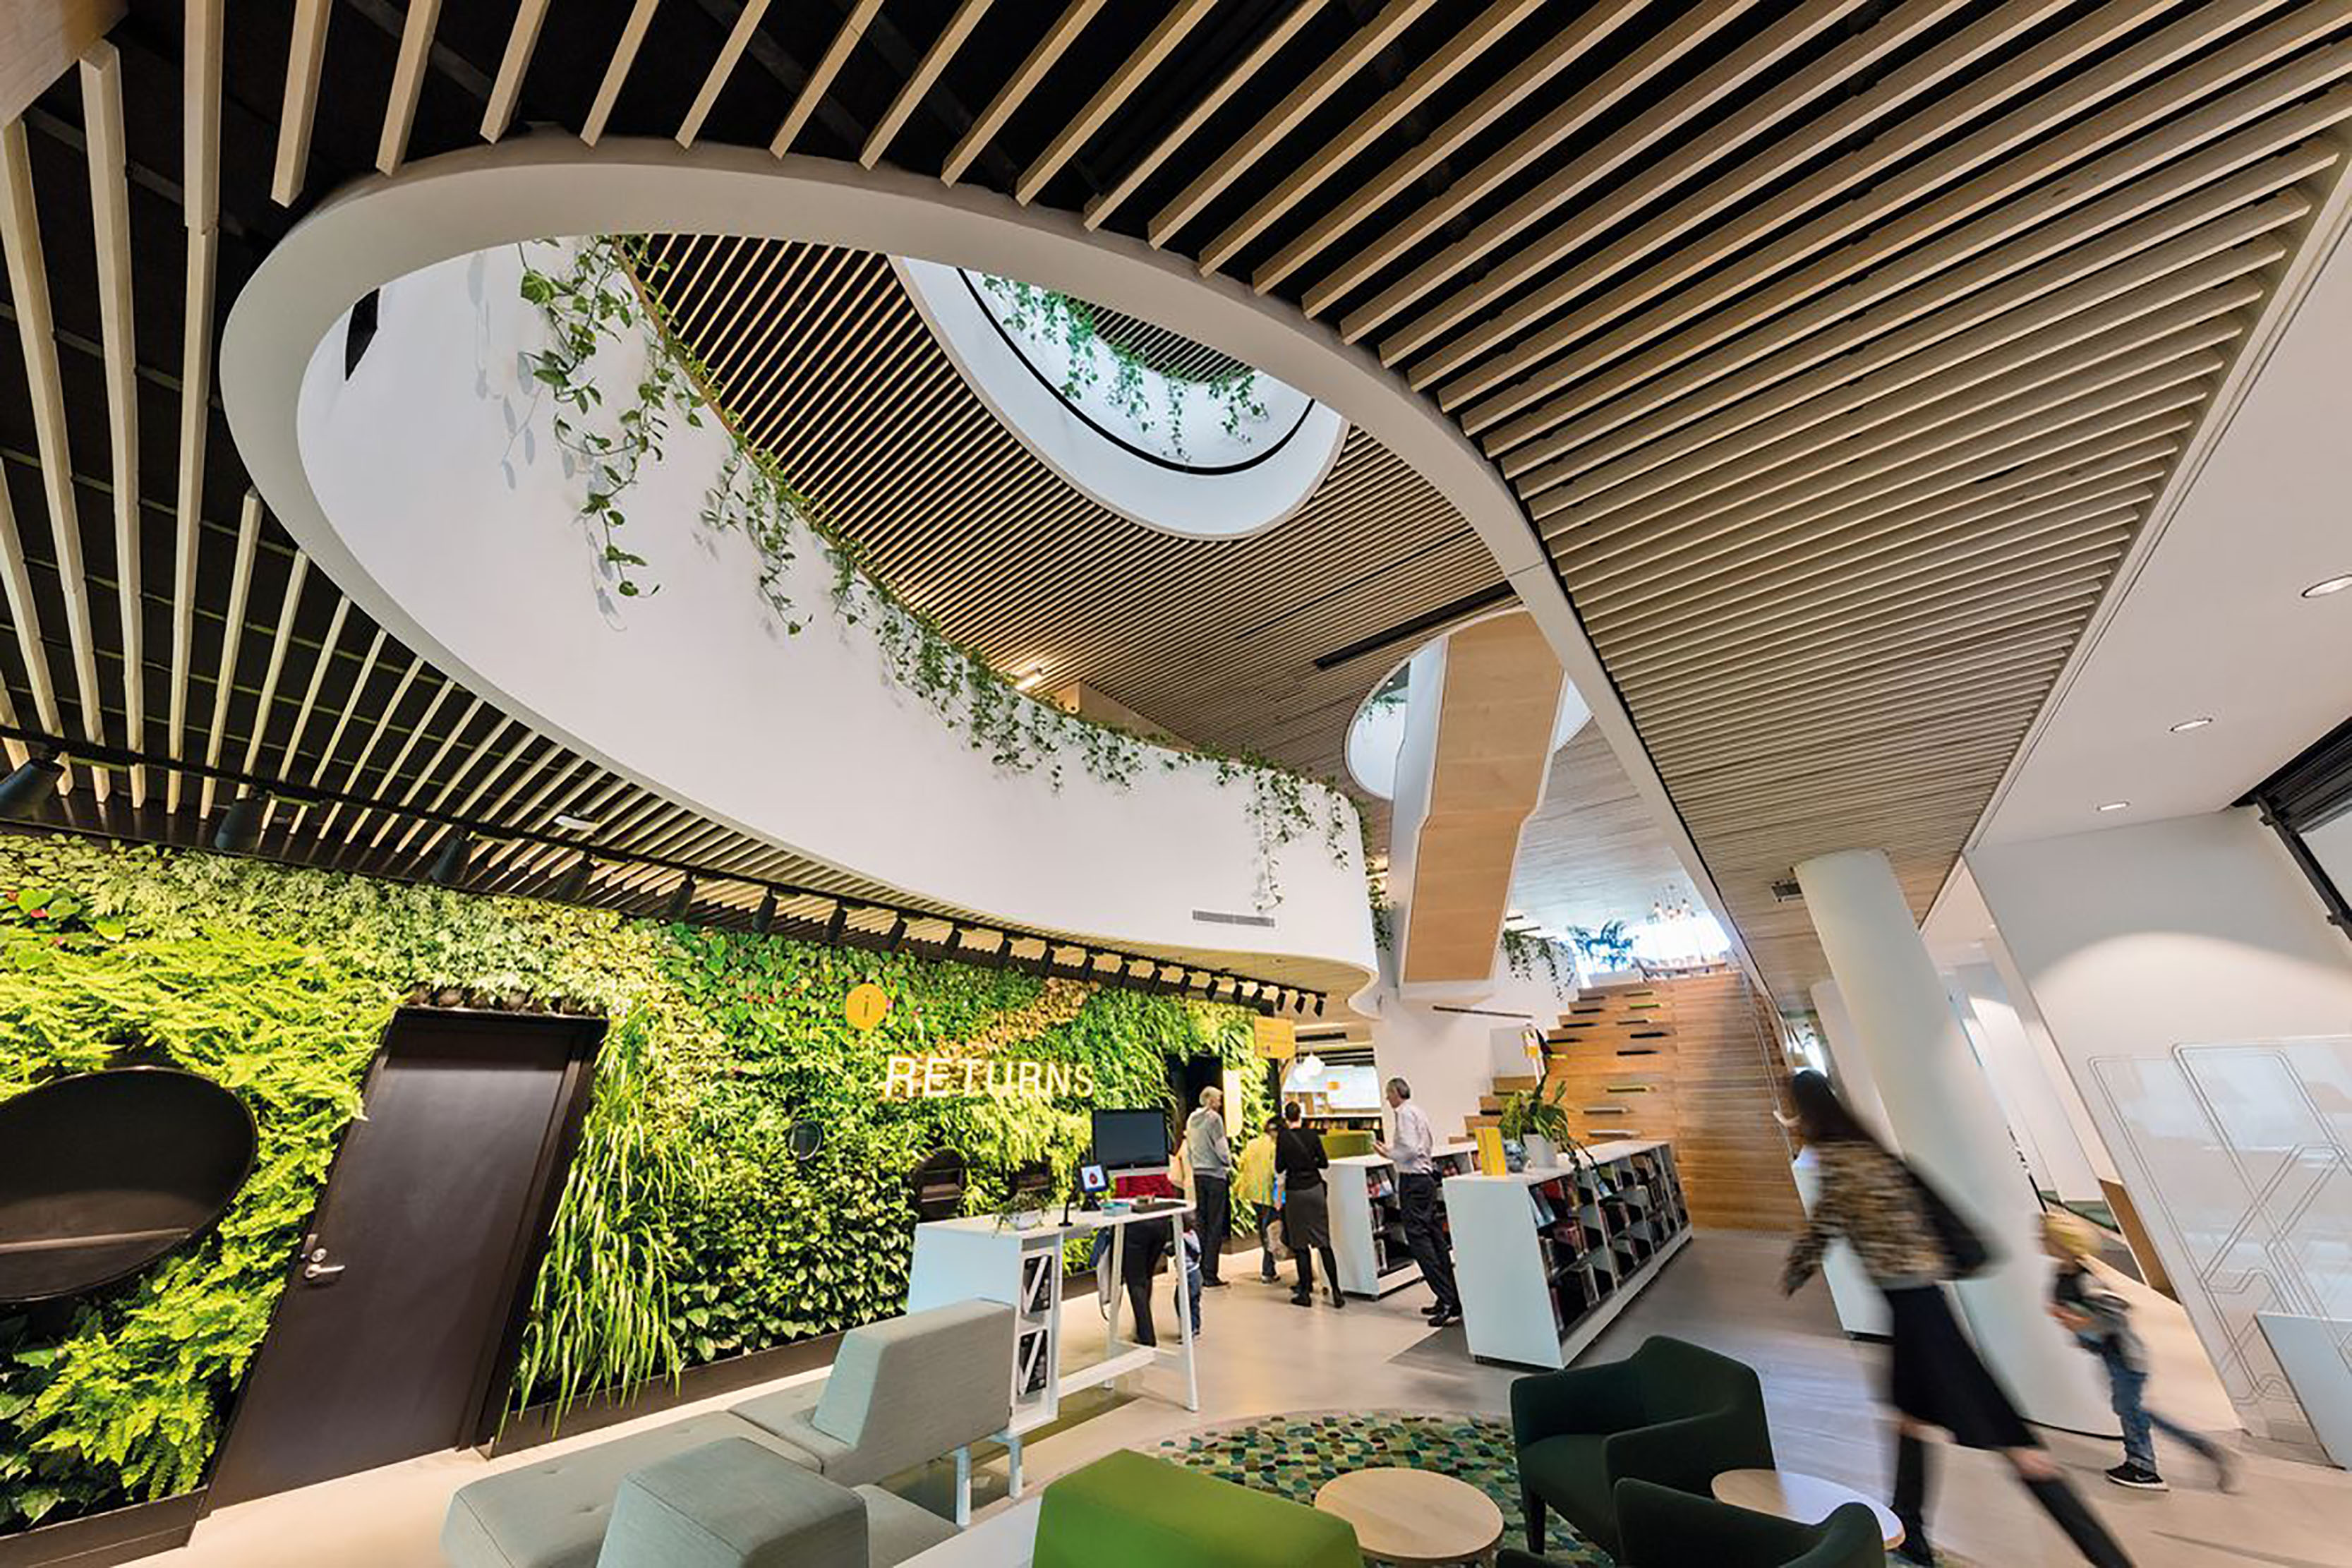 Green wall inside a library building